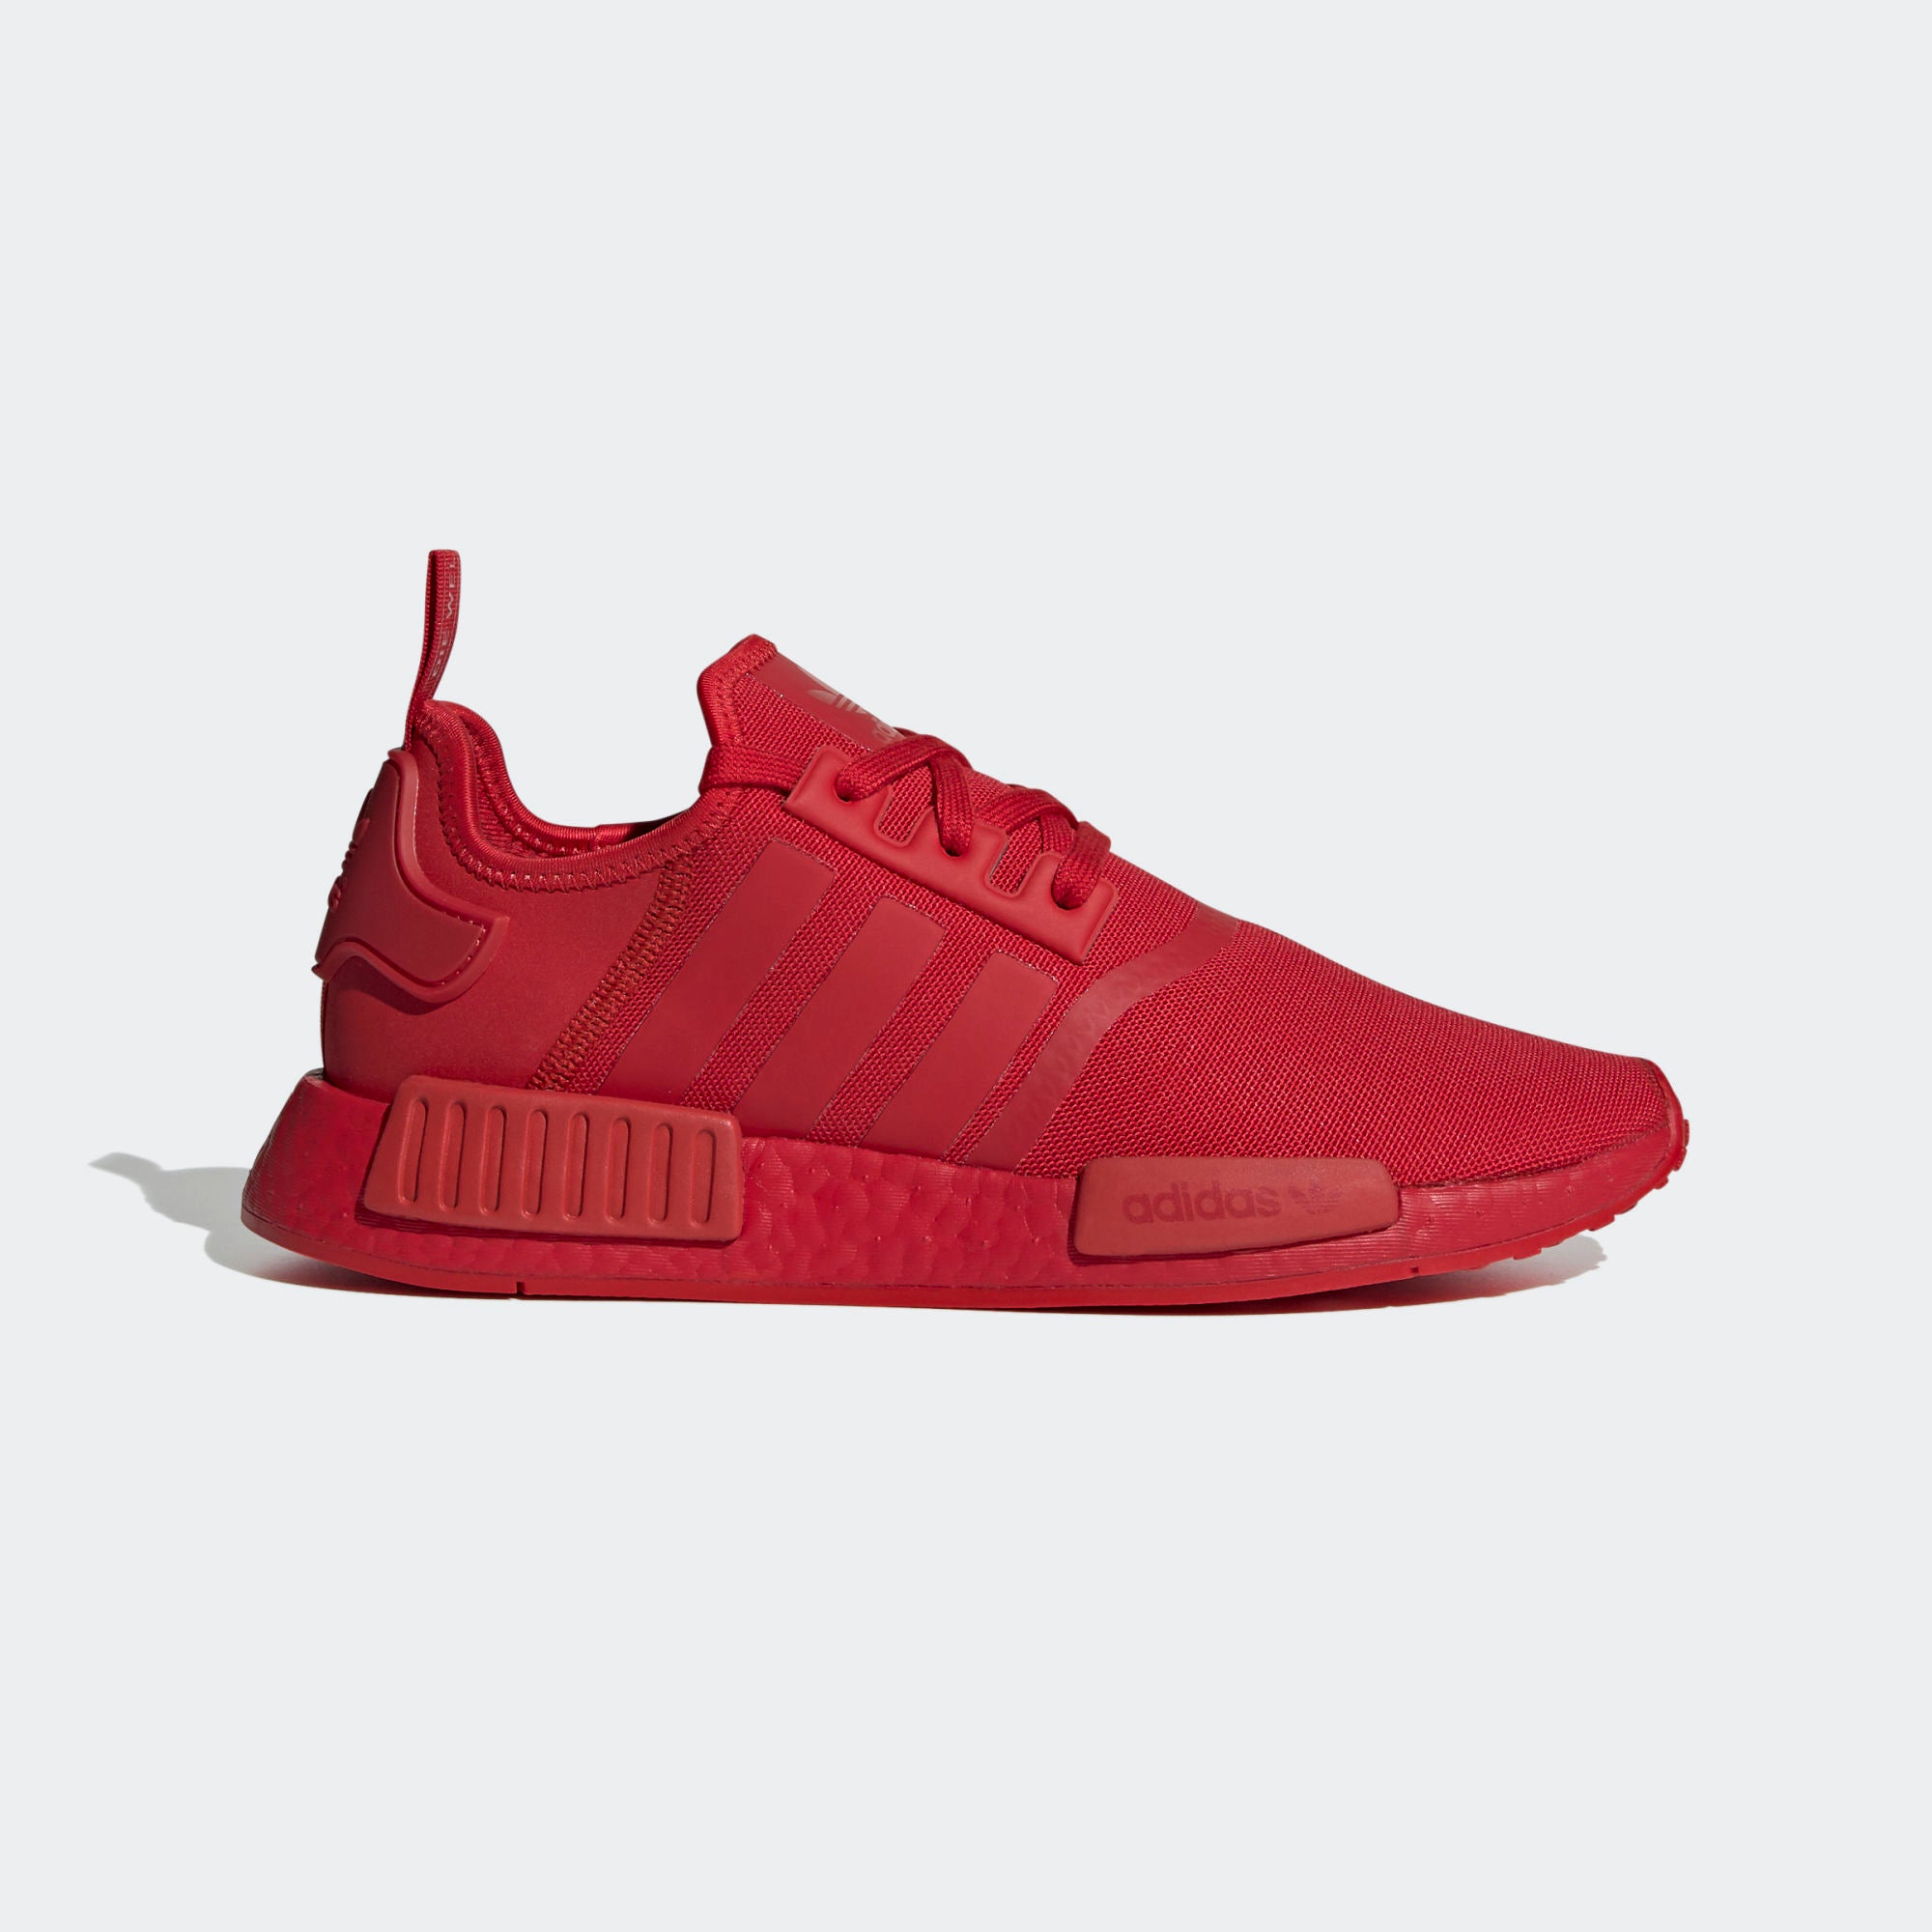 Make a Statement with Adidas Scarlet Red Shoes